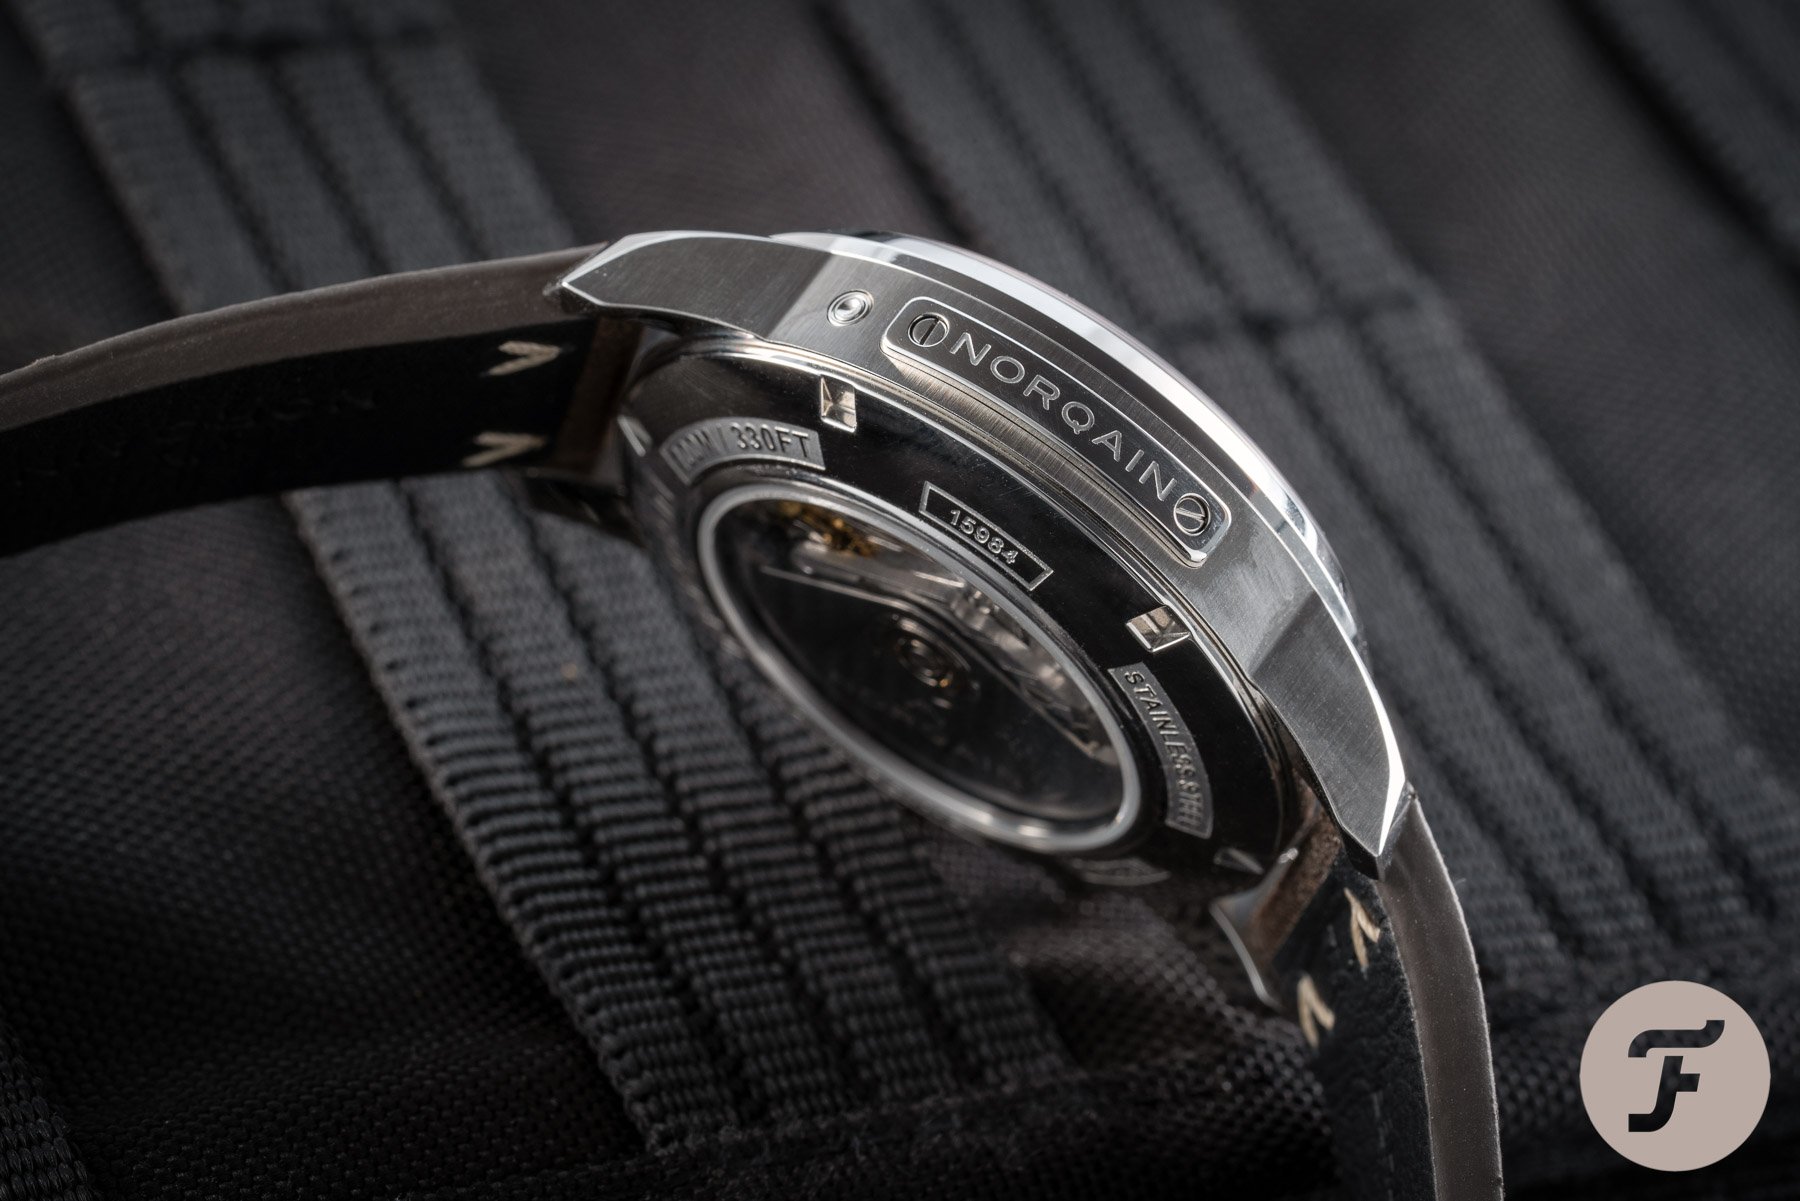 Hands-On With The Norqain Freedom 60 Chronograph